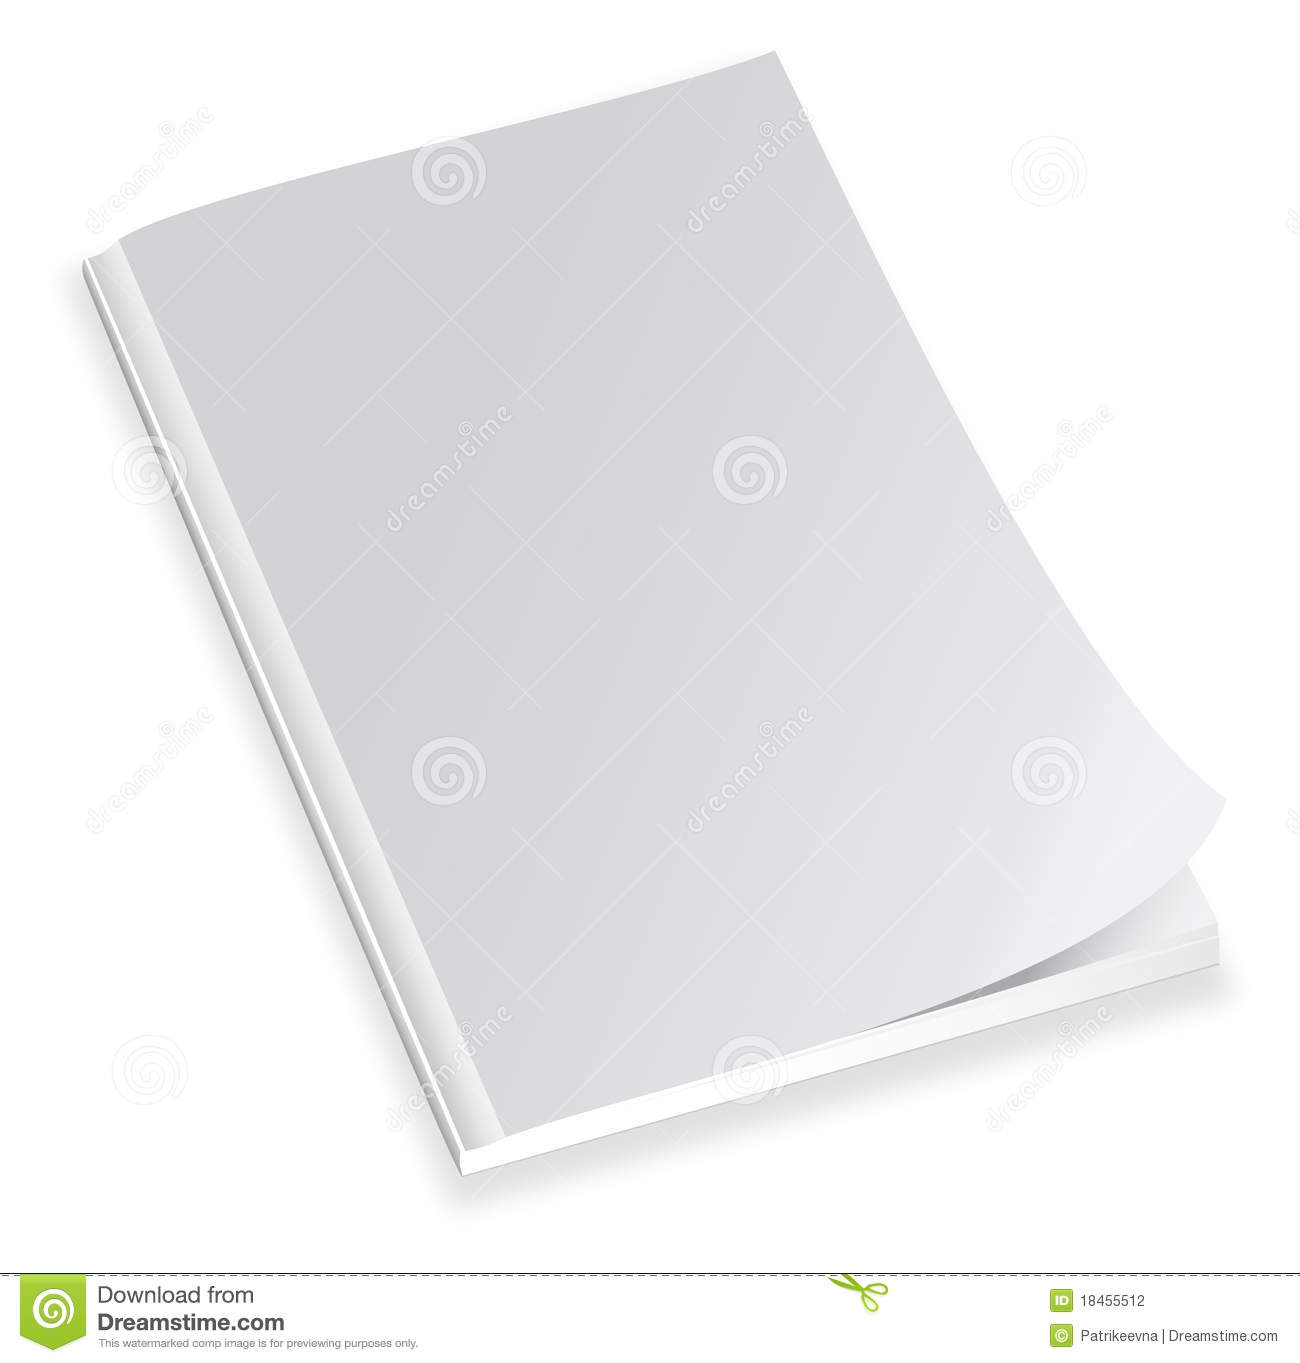 18 Blank Magazine Cover Design Images - Make Your Own with Blank Magazine Template Psd